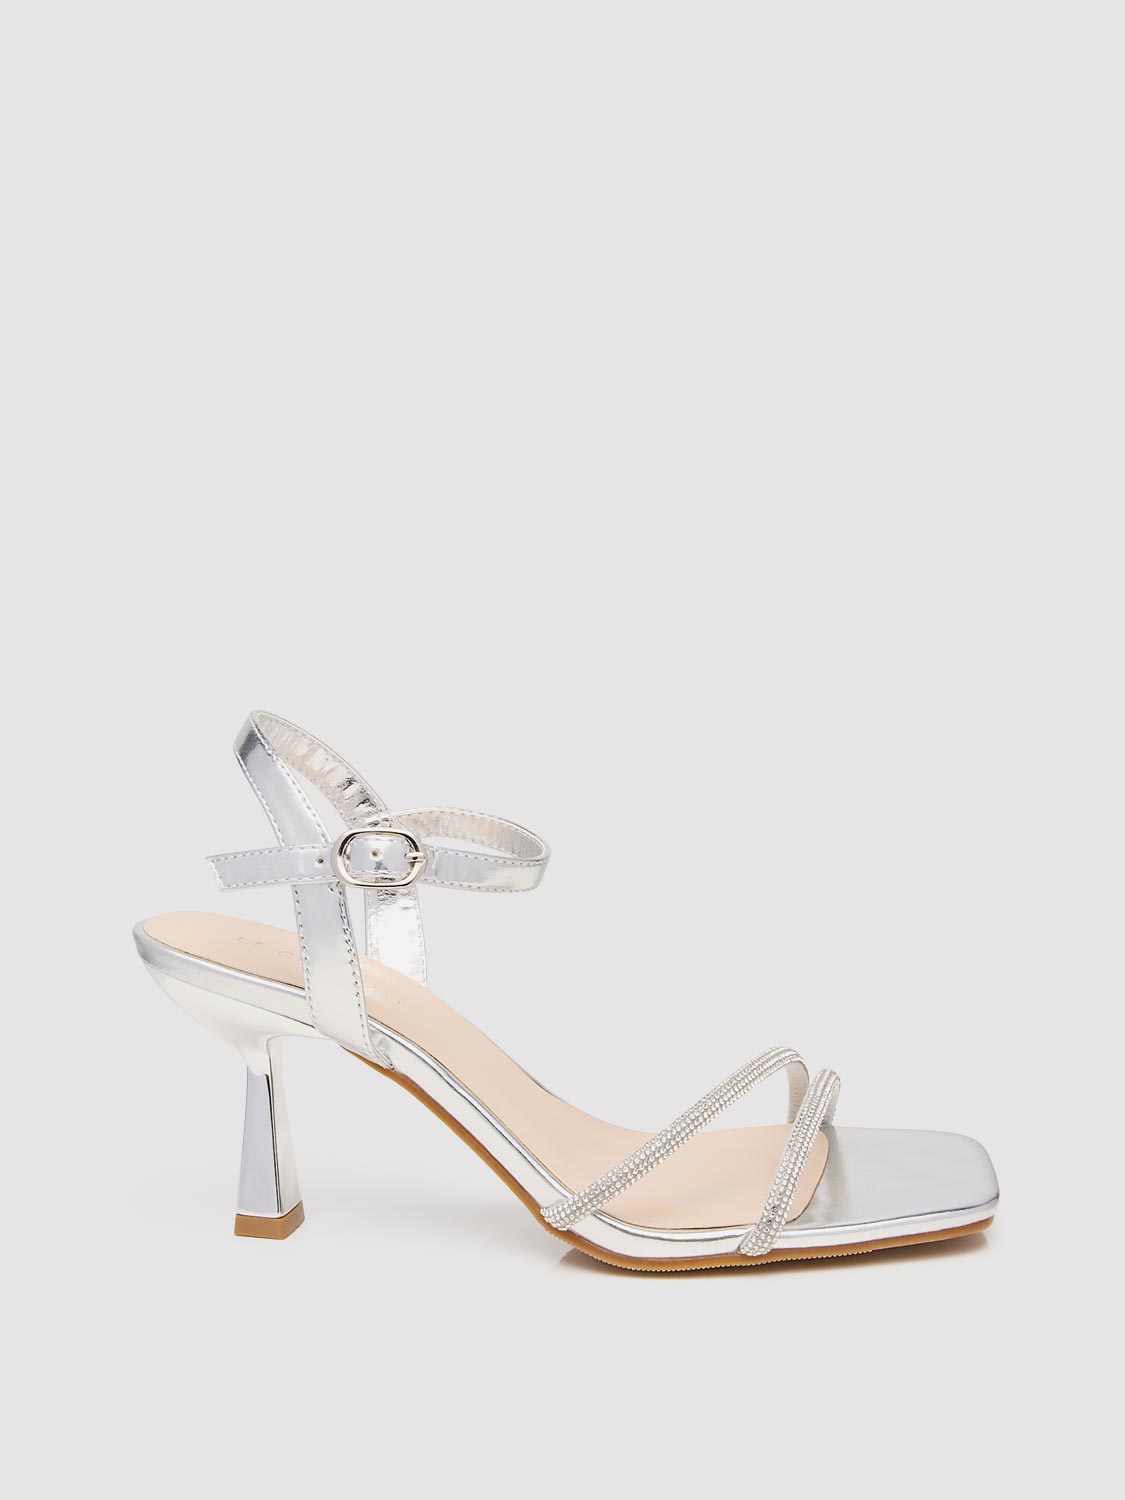 Jewelled Square Toe Strappy High Heel Sandal